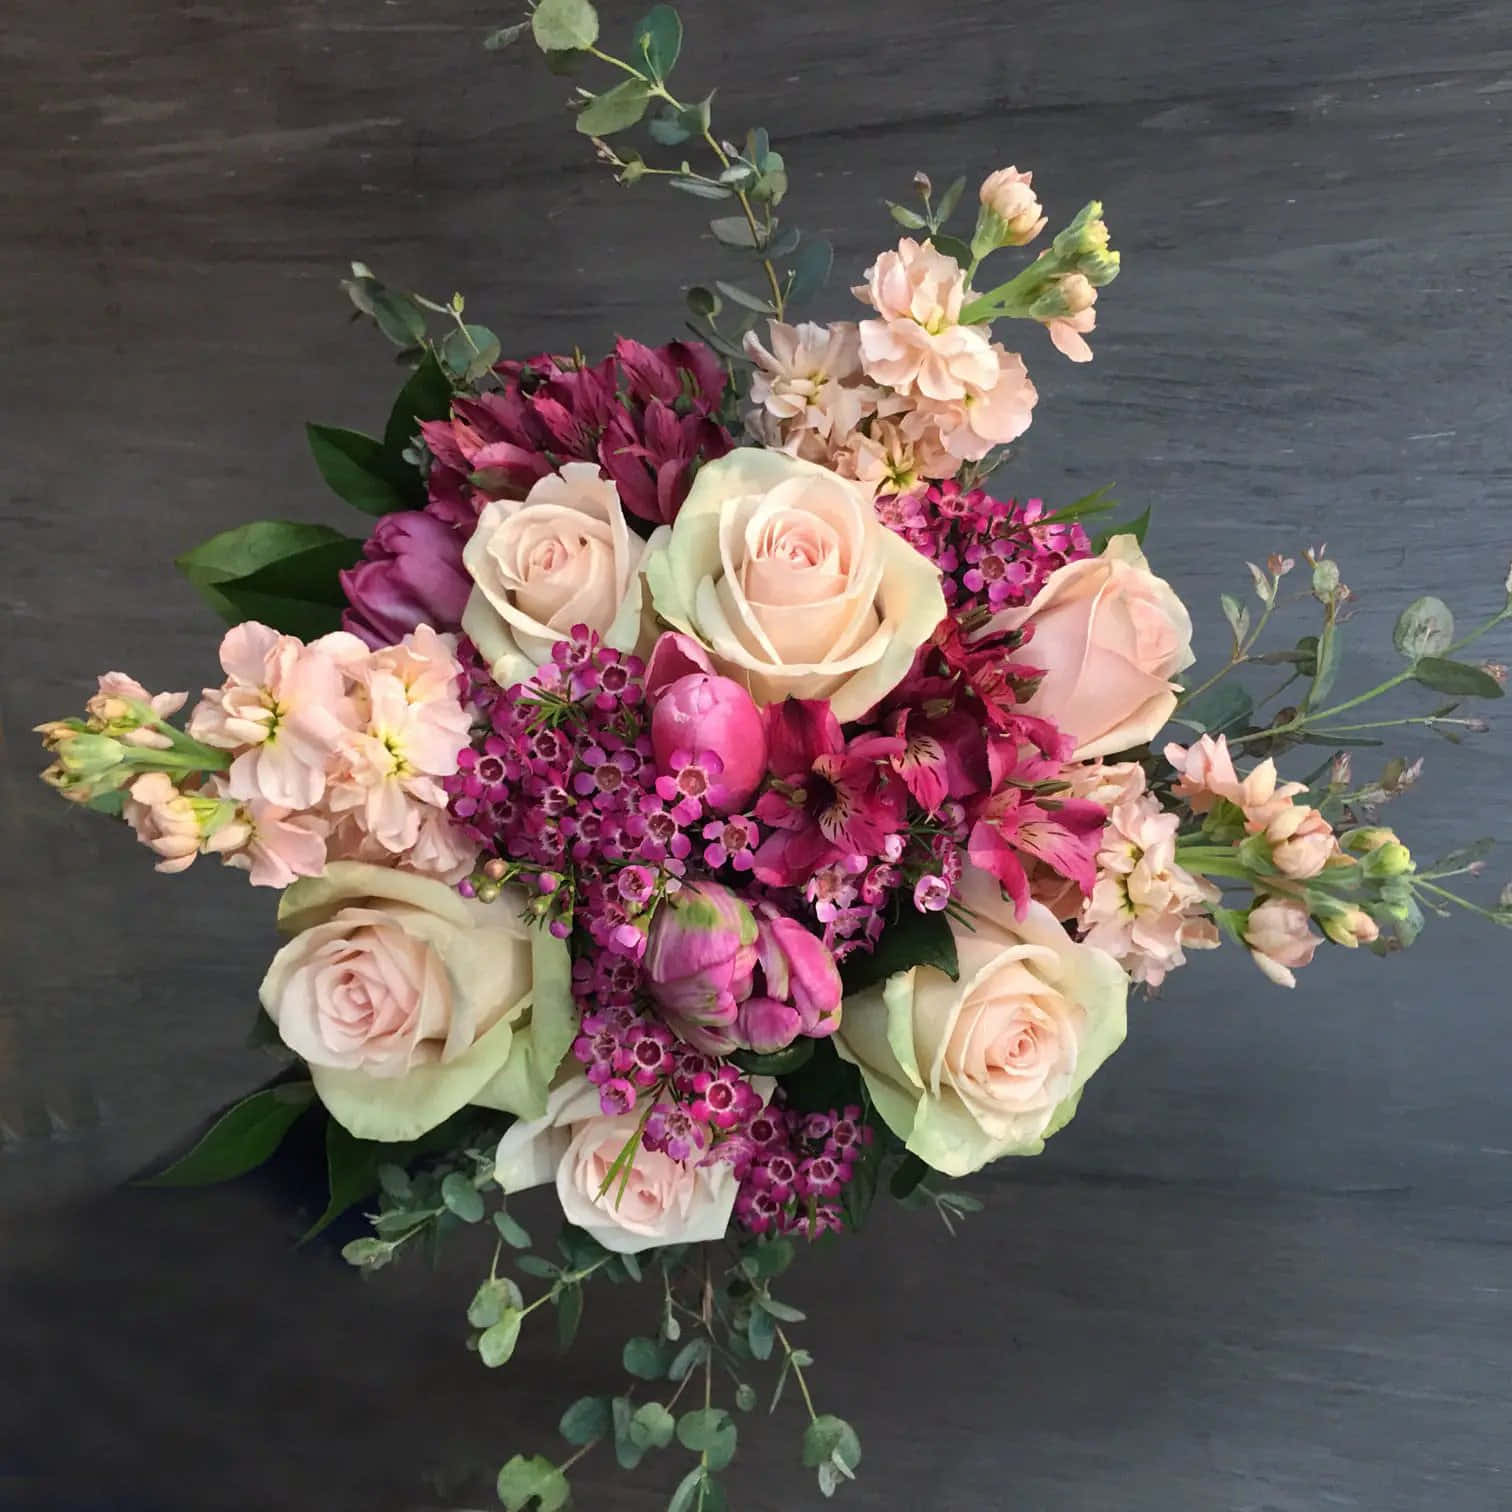 A Bouquet Of Pink And White Flowers